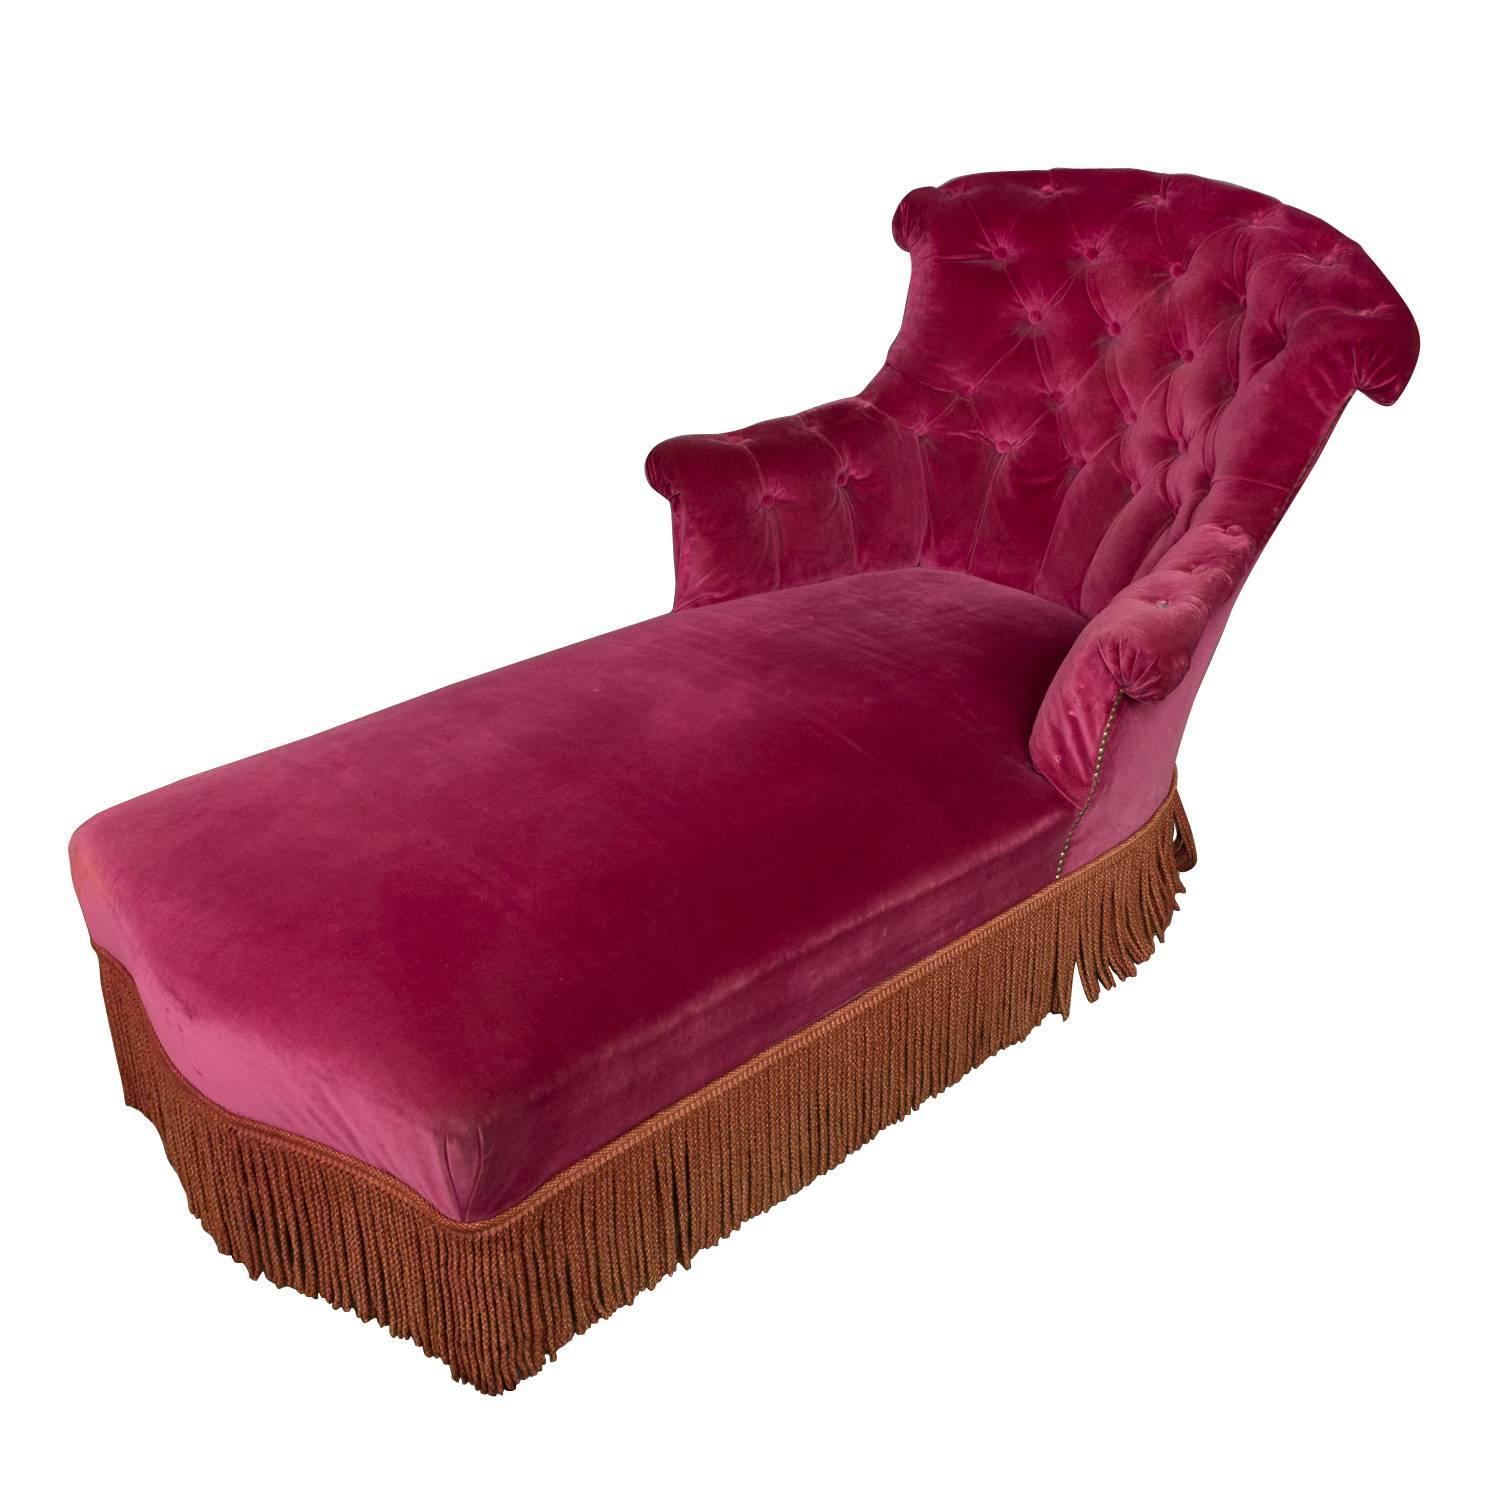 Chaise Longue In English Thesecretconsul intended for The Awesome  chaise longue in english pertaining to  Residence